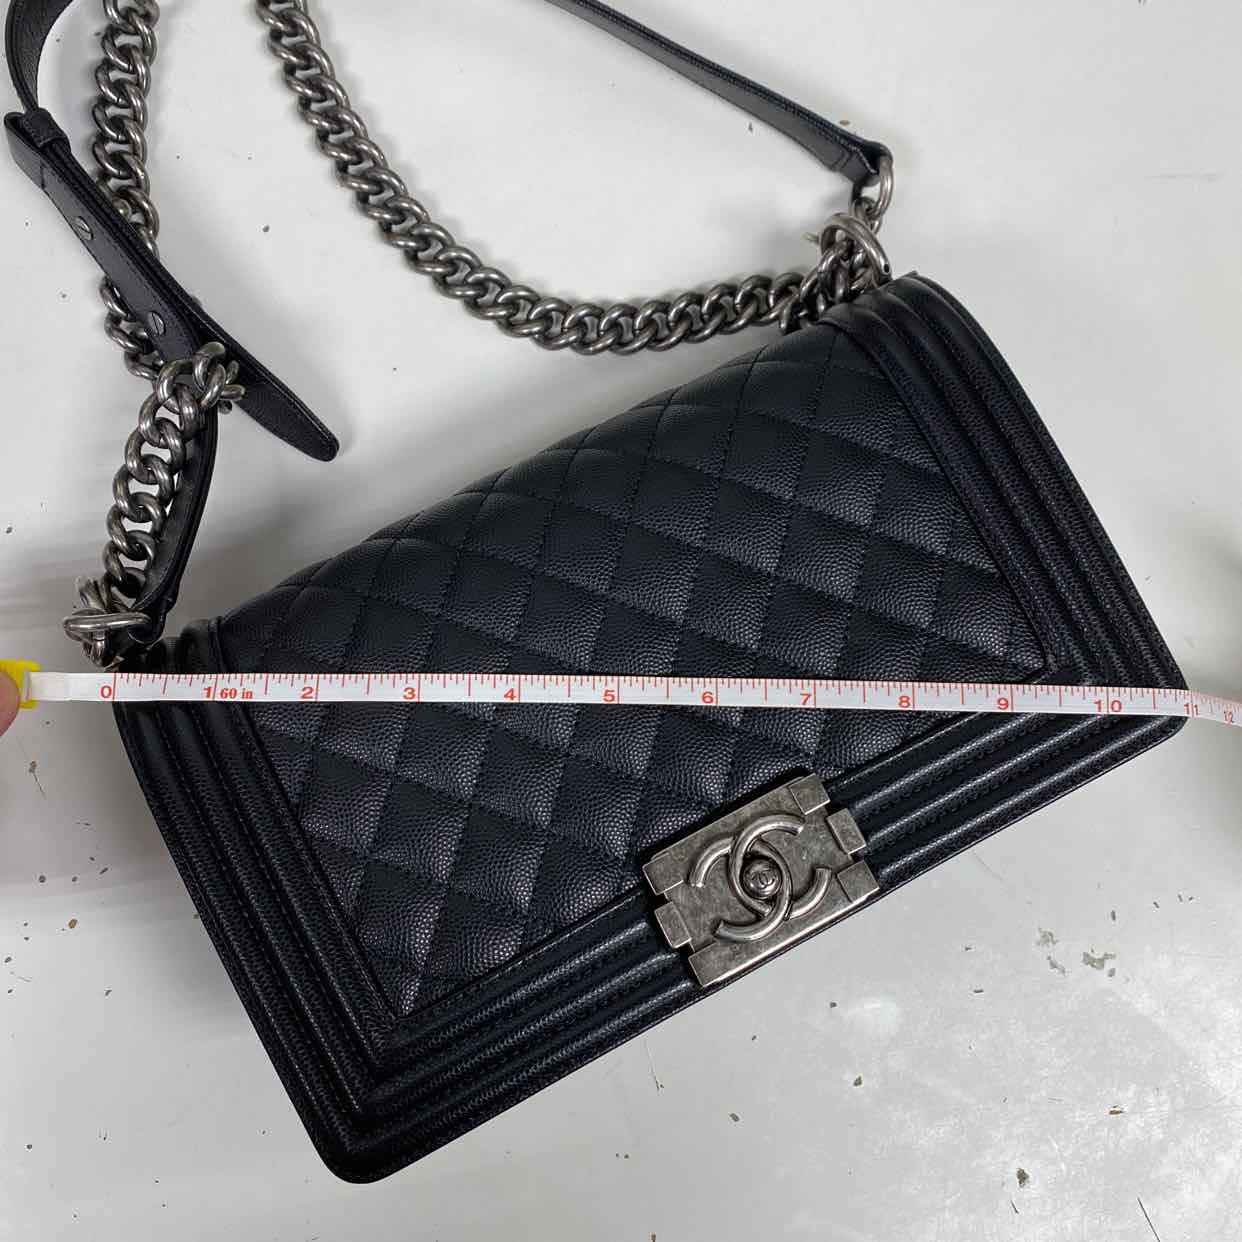 Chanel Handbag "QUILTED" Used Black Size OS